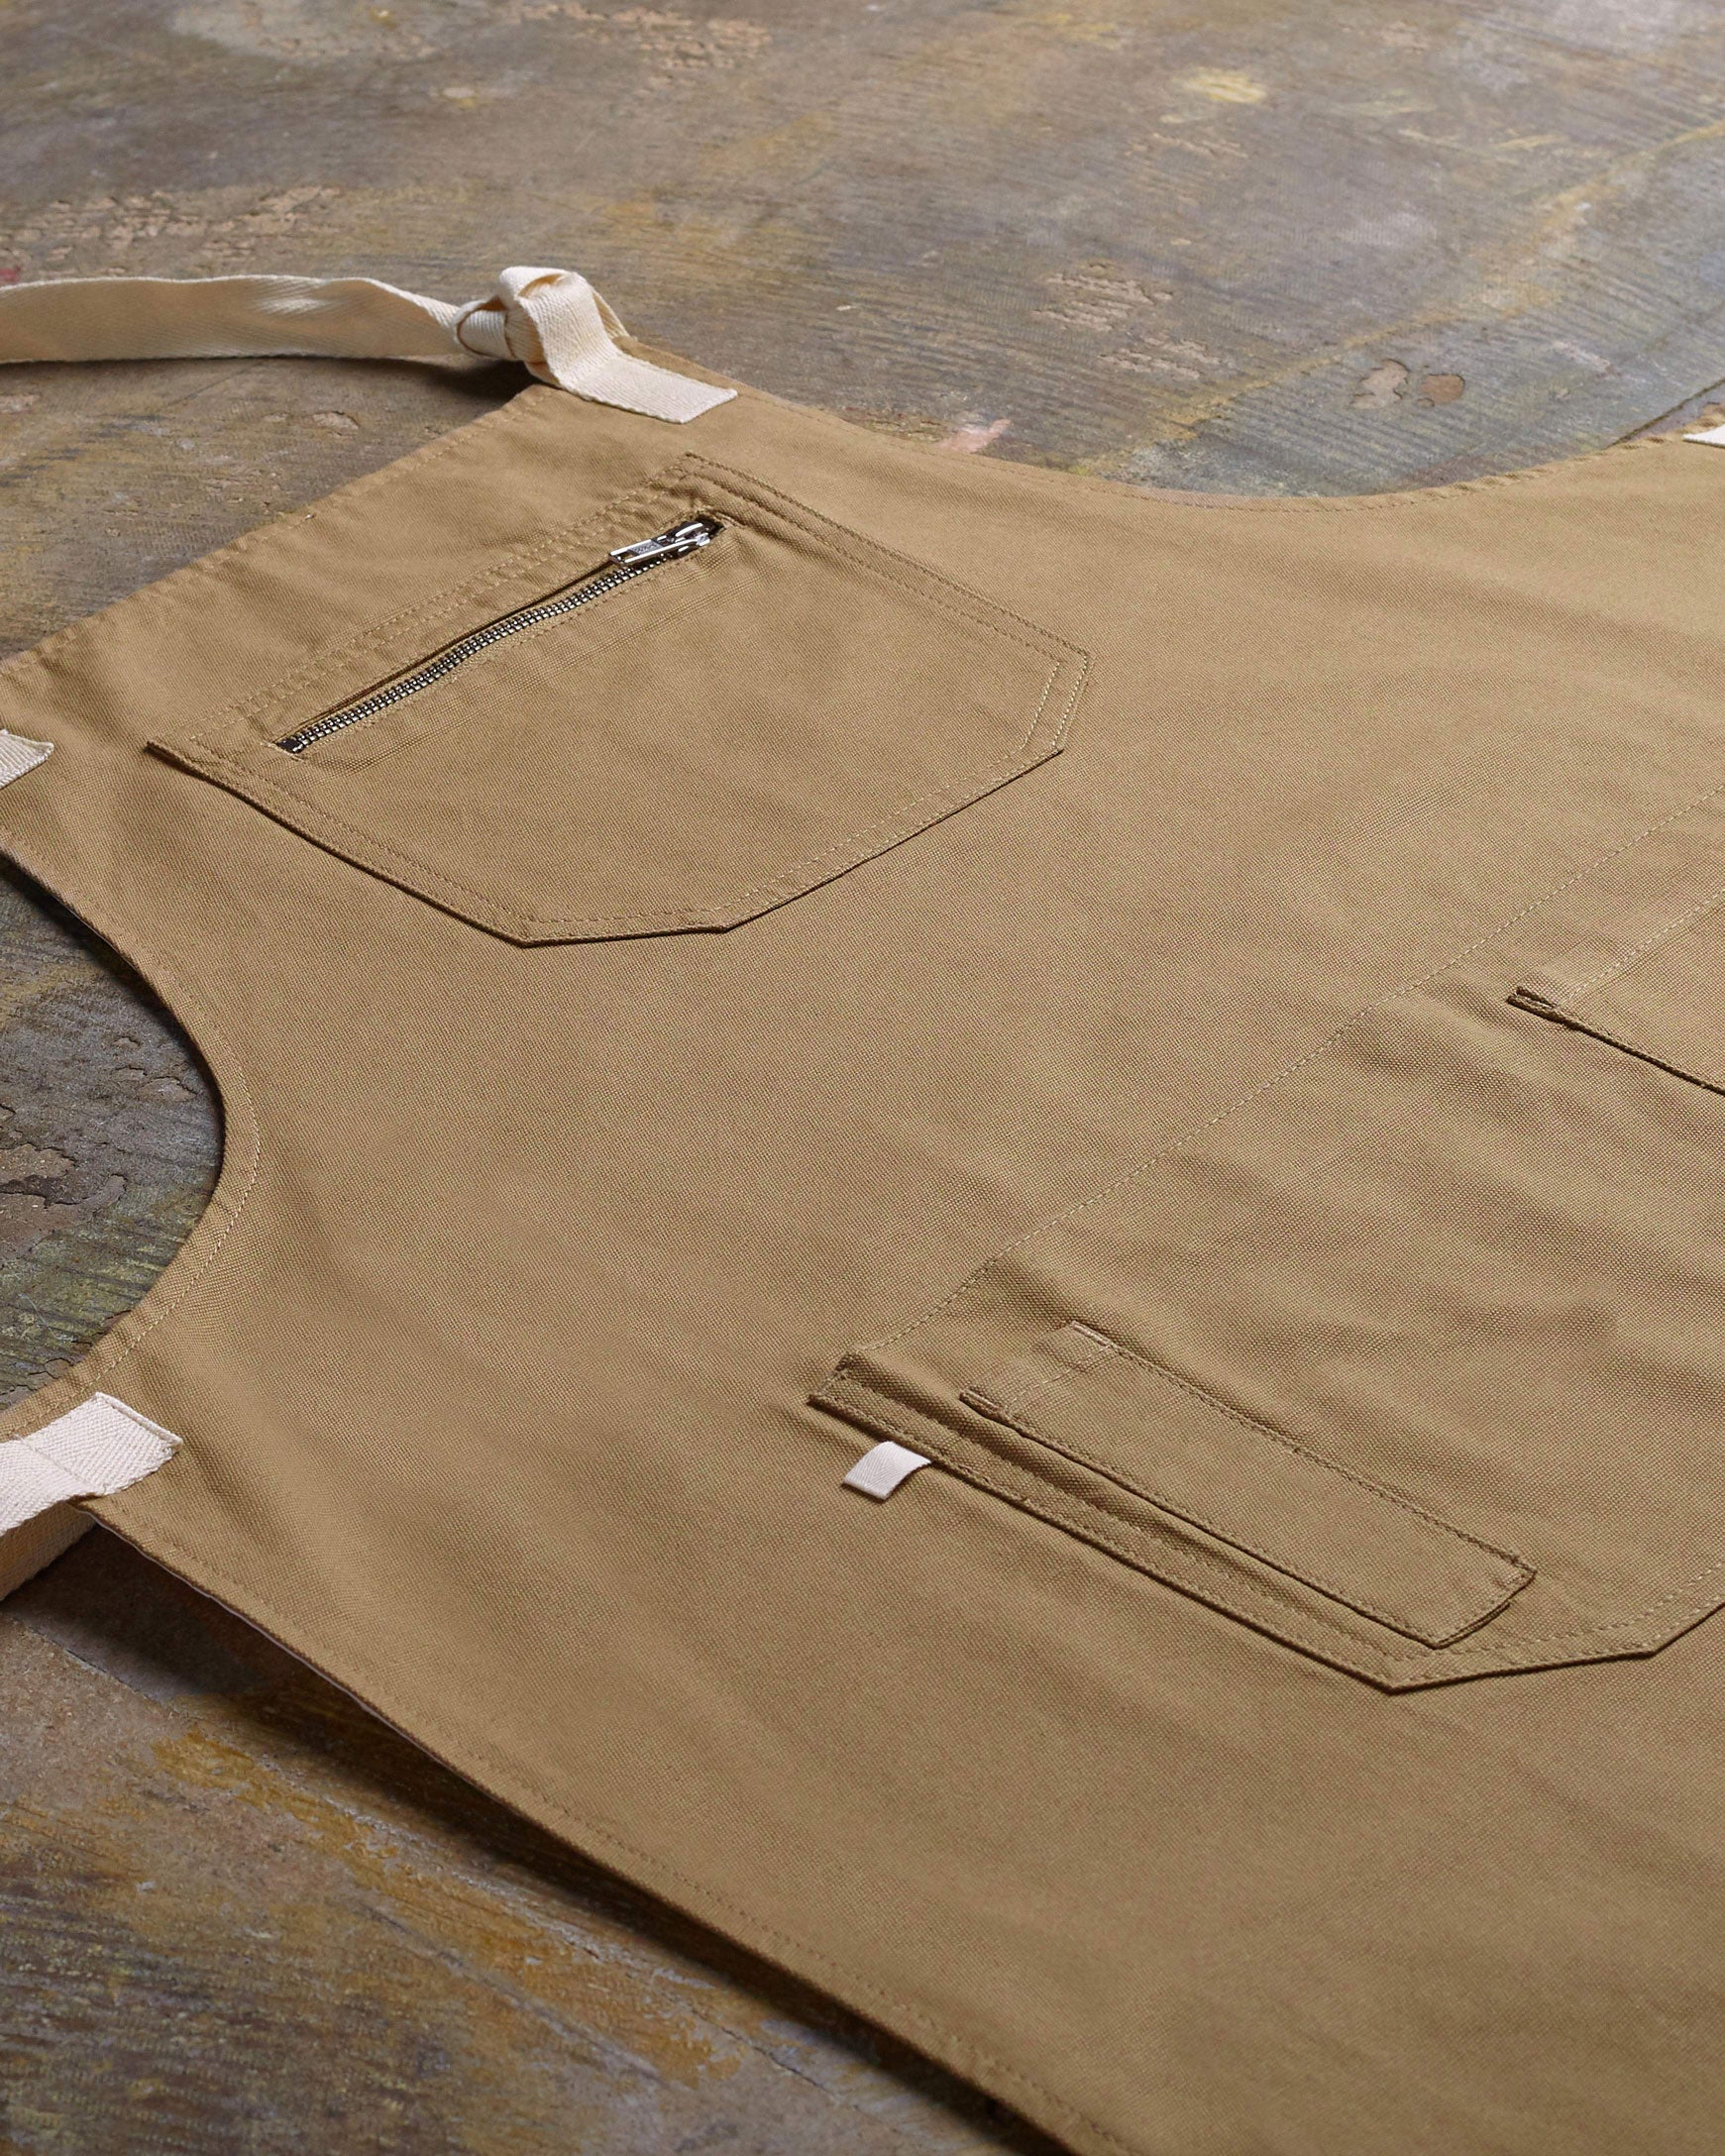 Angled flat view of khaki #9004 carpenter apron by Uskees. Showing pen, phone and pouch pockets and clearer view of organic cotton fabric texture.